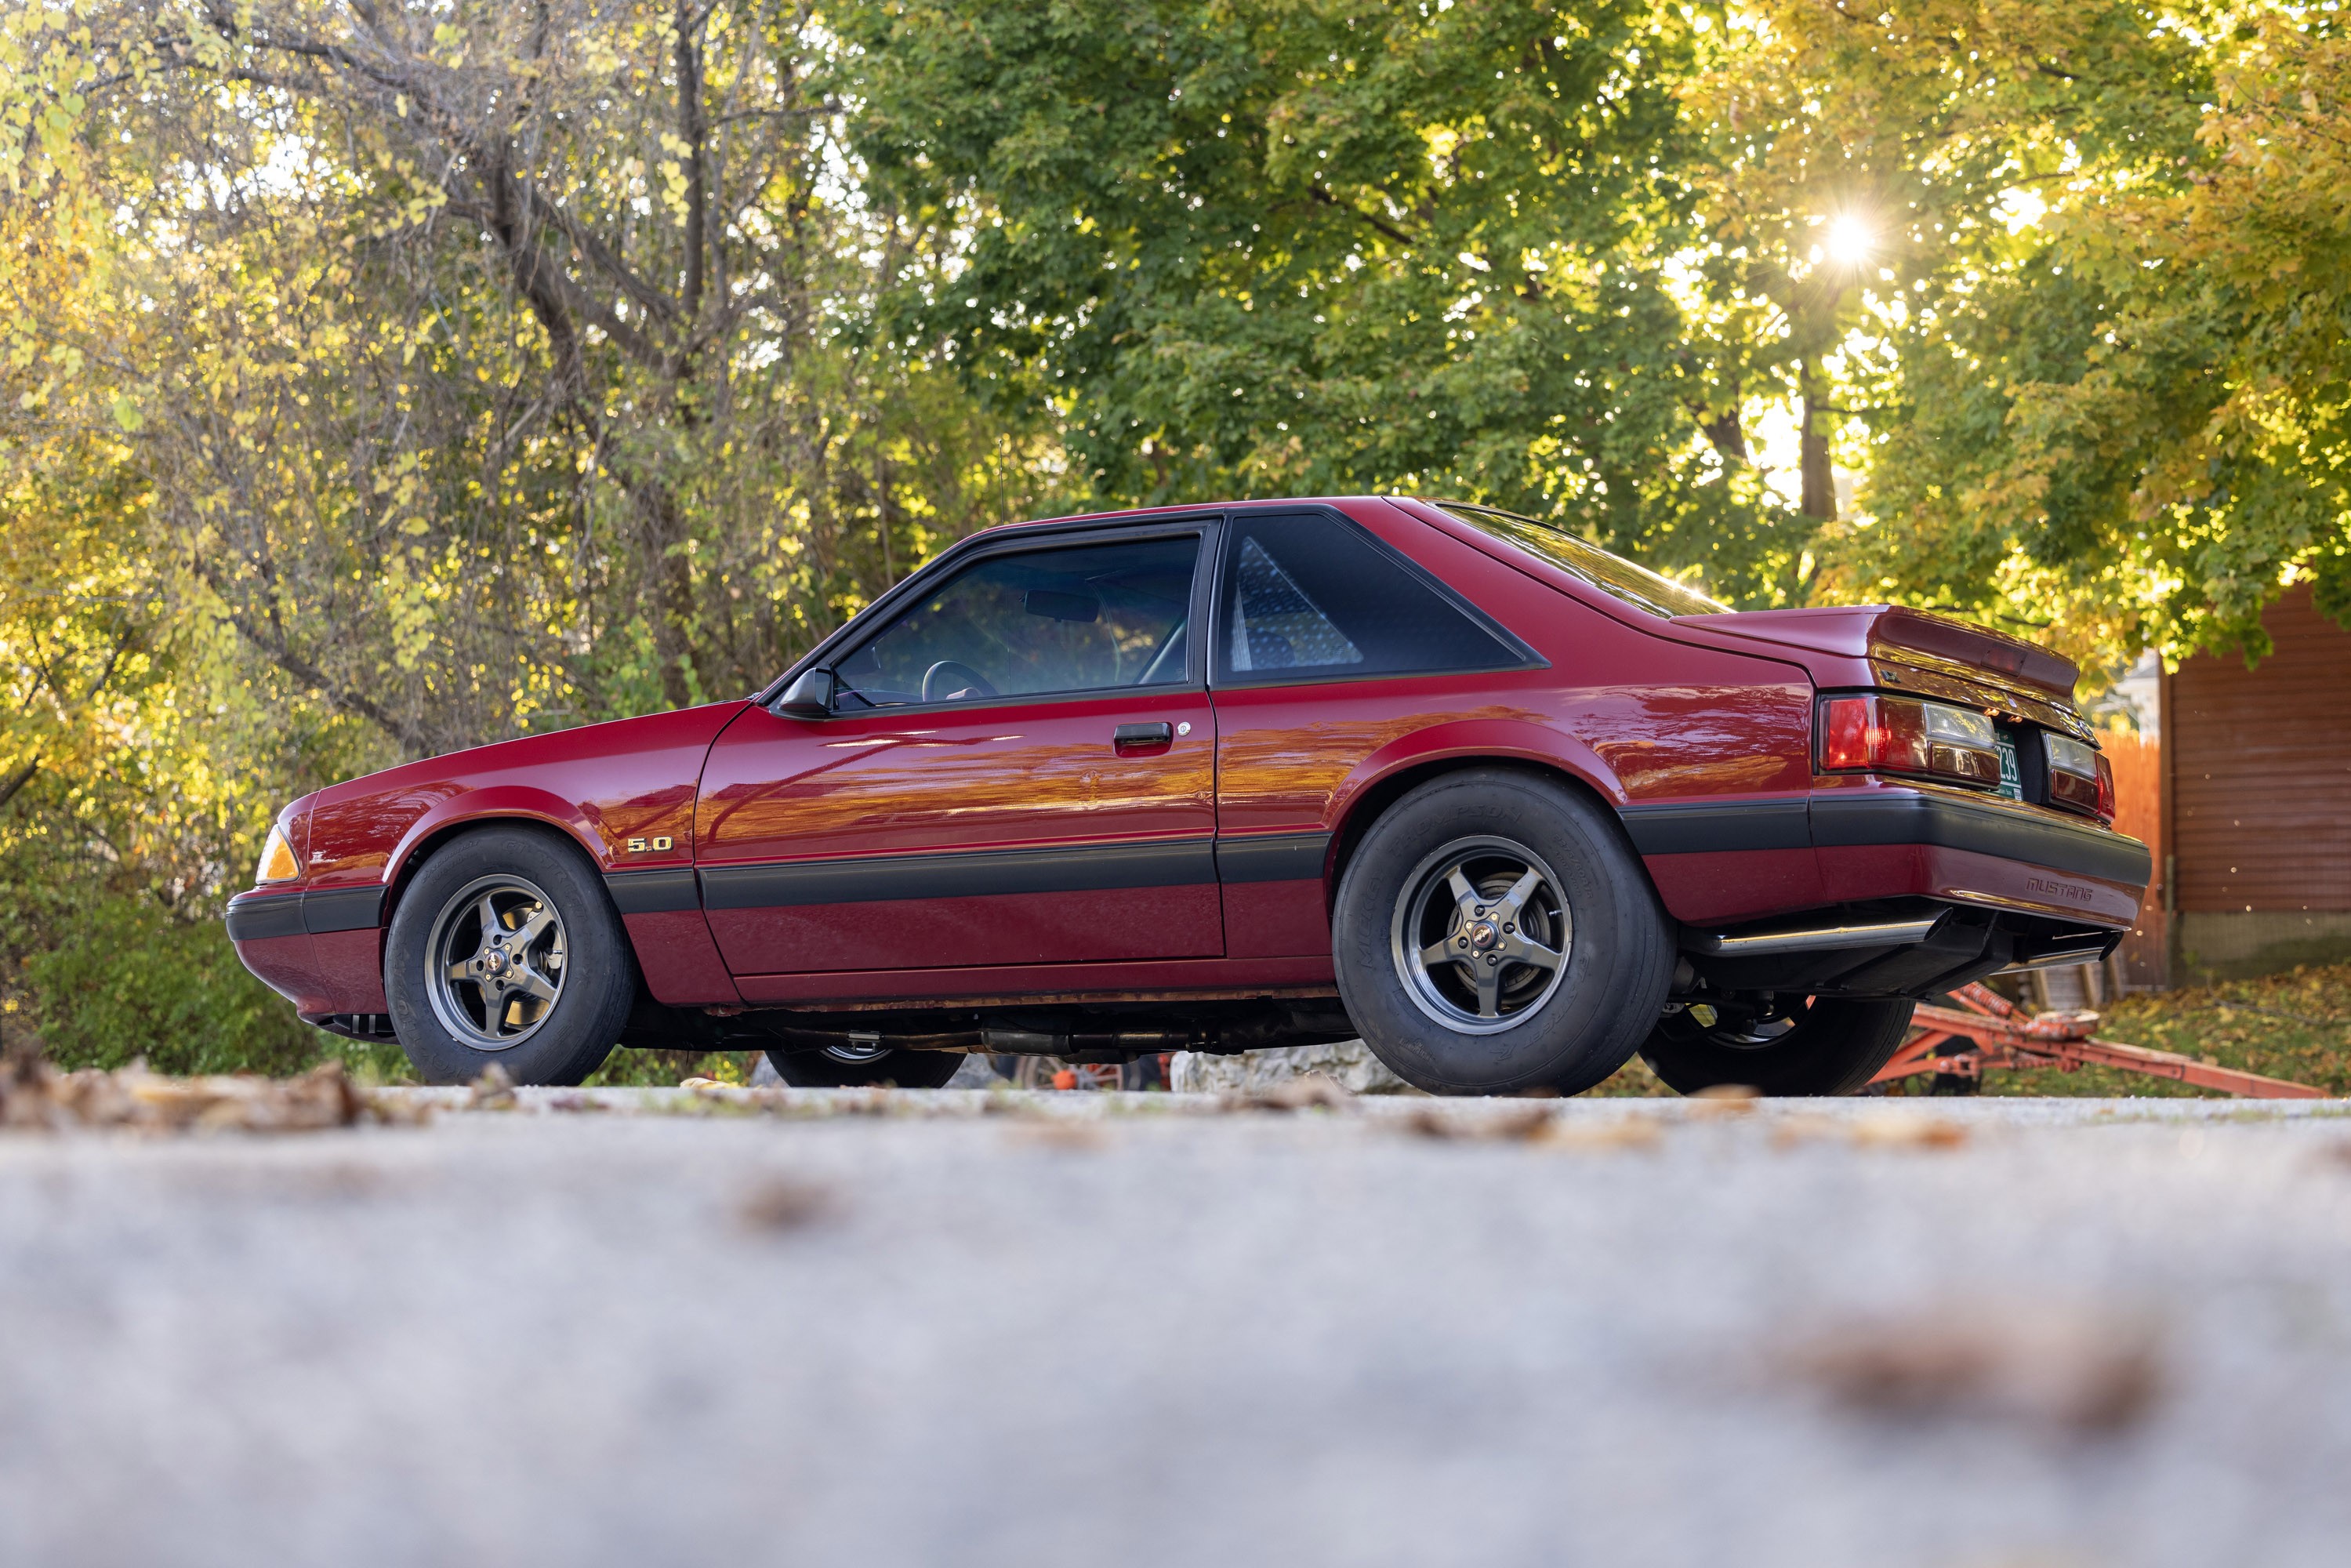 Fox Rehab: Part Three Of Our '91 Mustang 5.0 Makeover